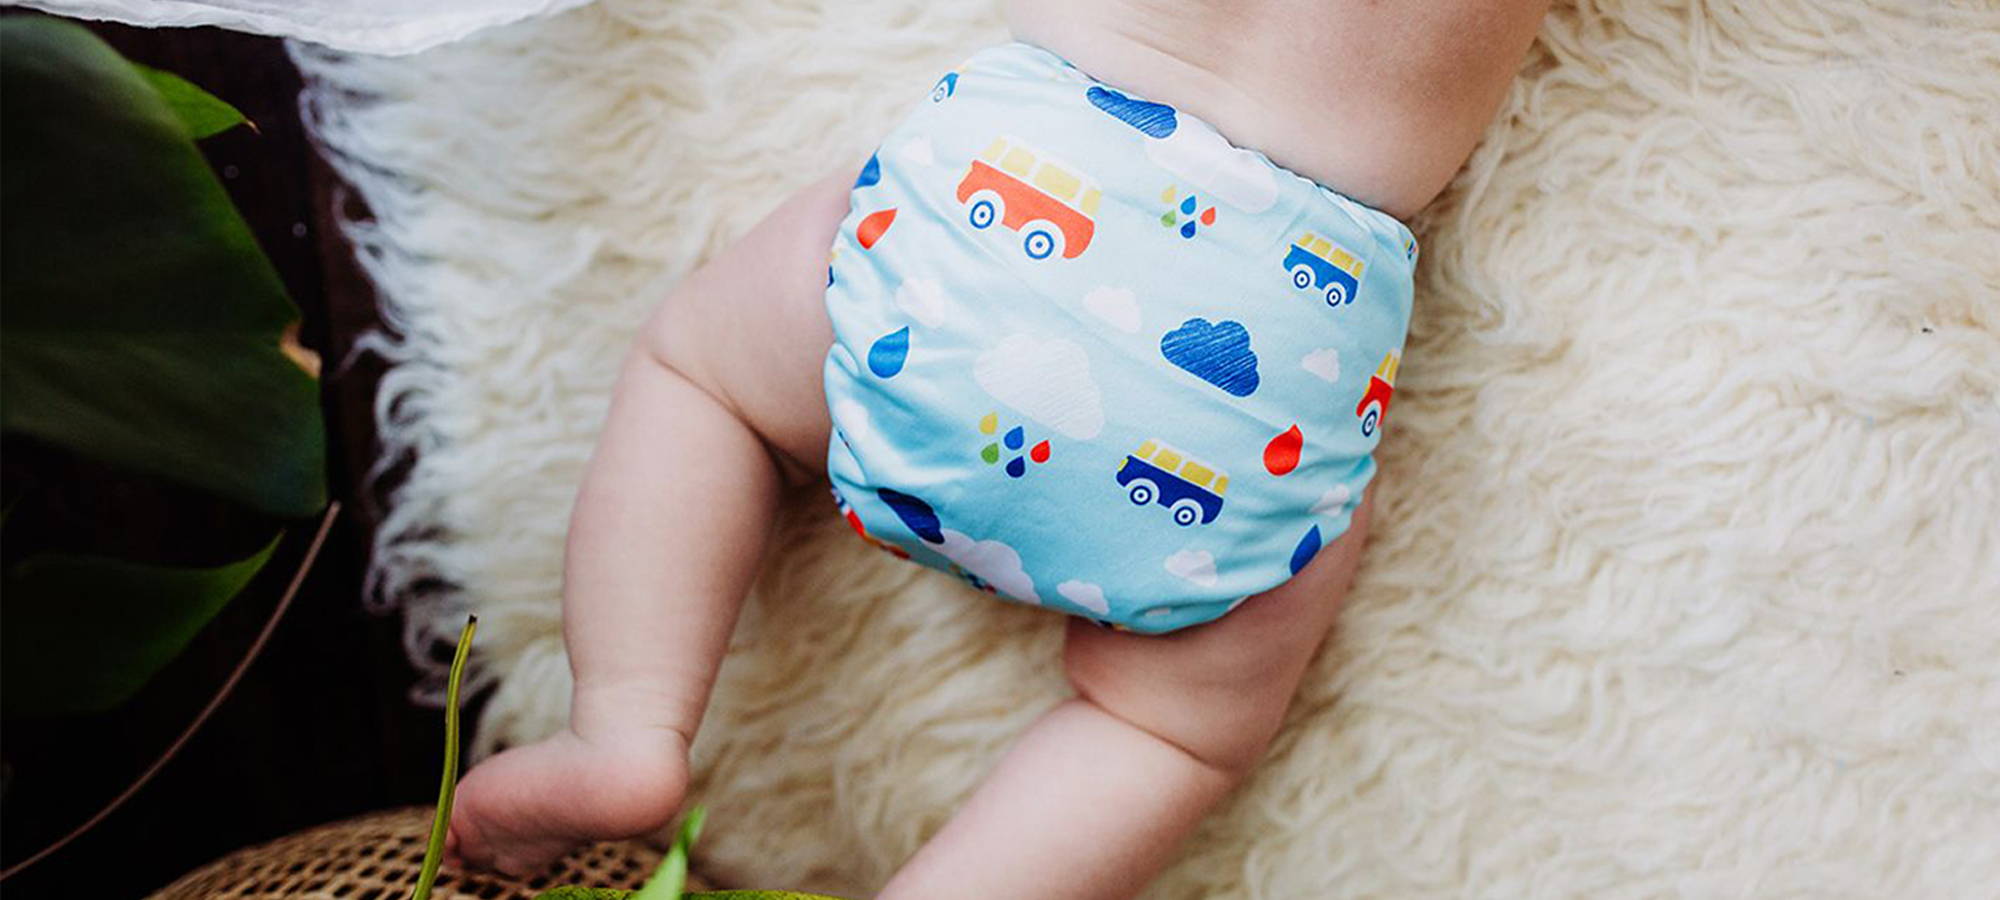 Planes Trains baby dreaming about some Simple Being cloth diapers. Looking utterly comfortable in his stylish pair of diapers.